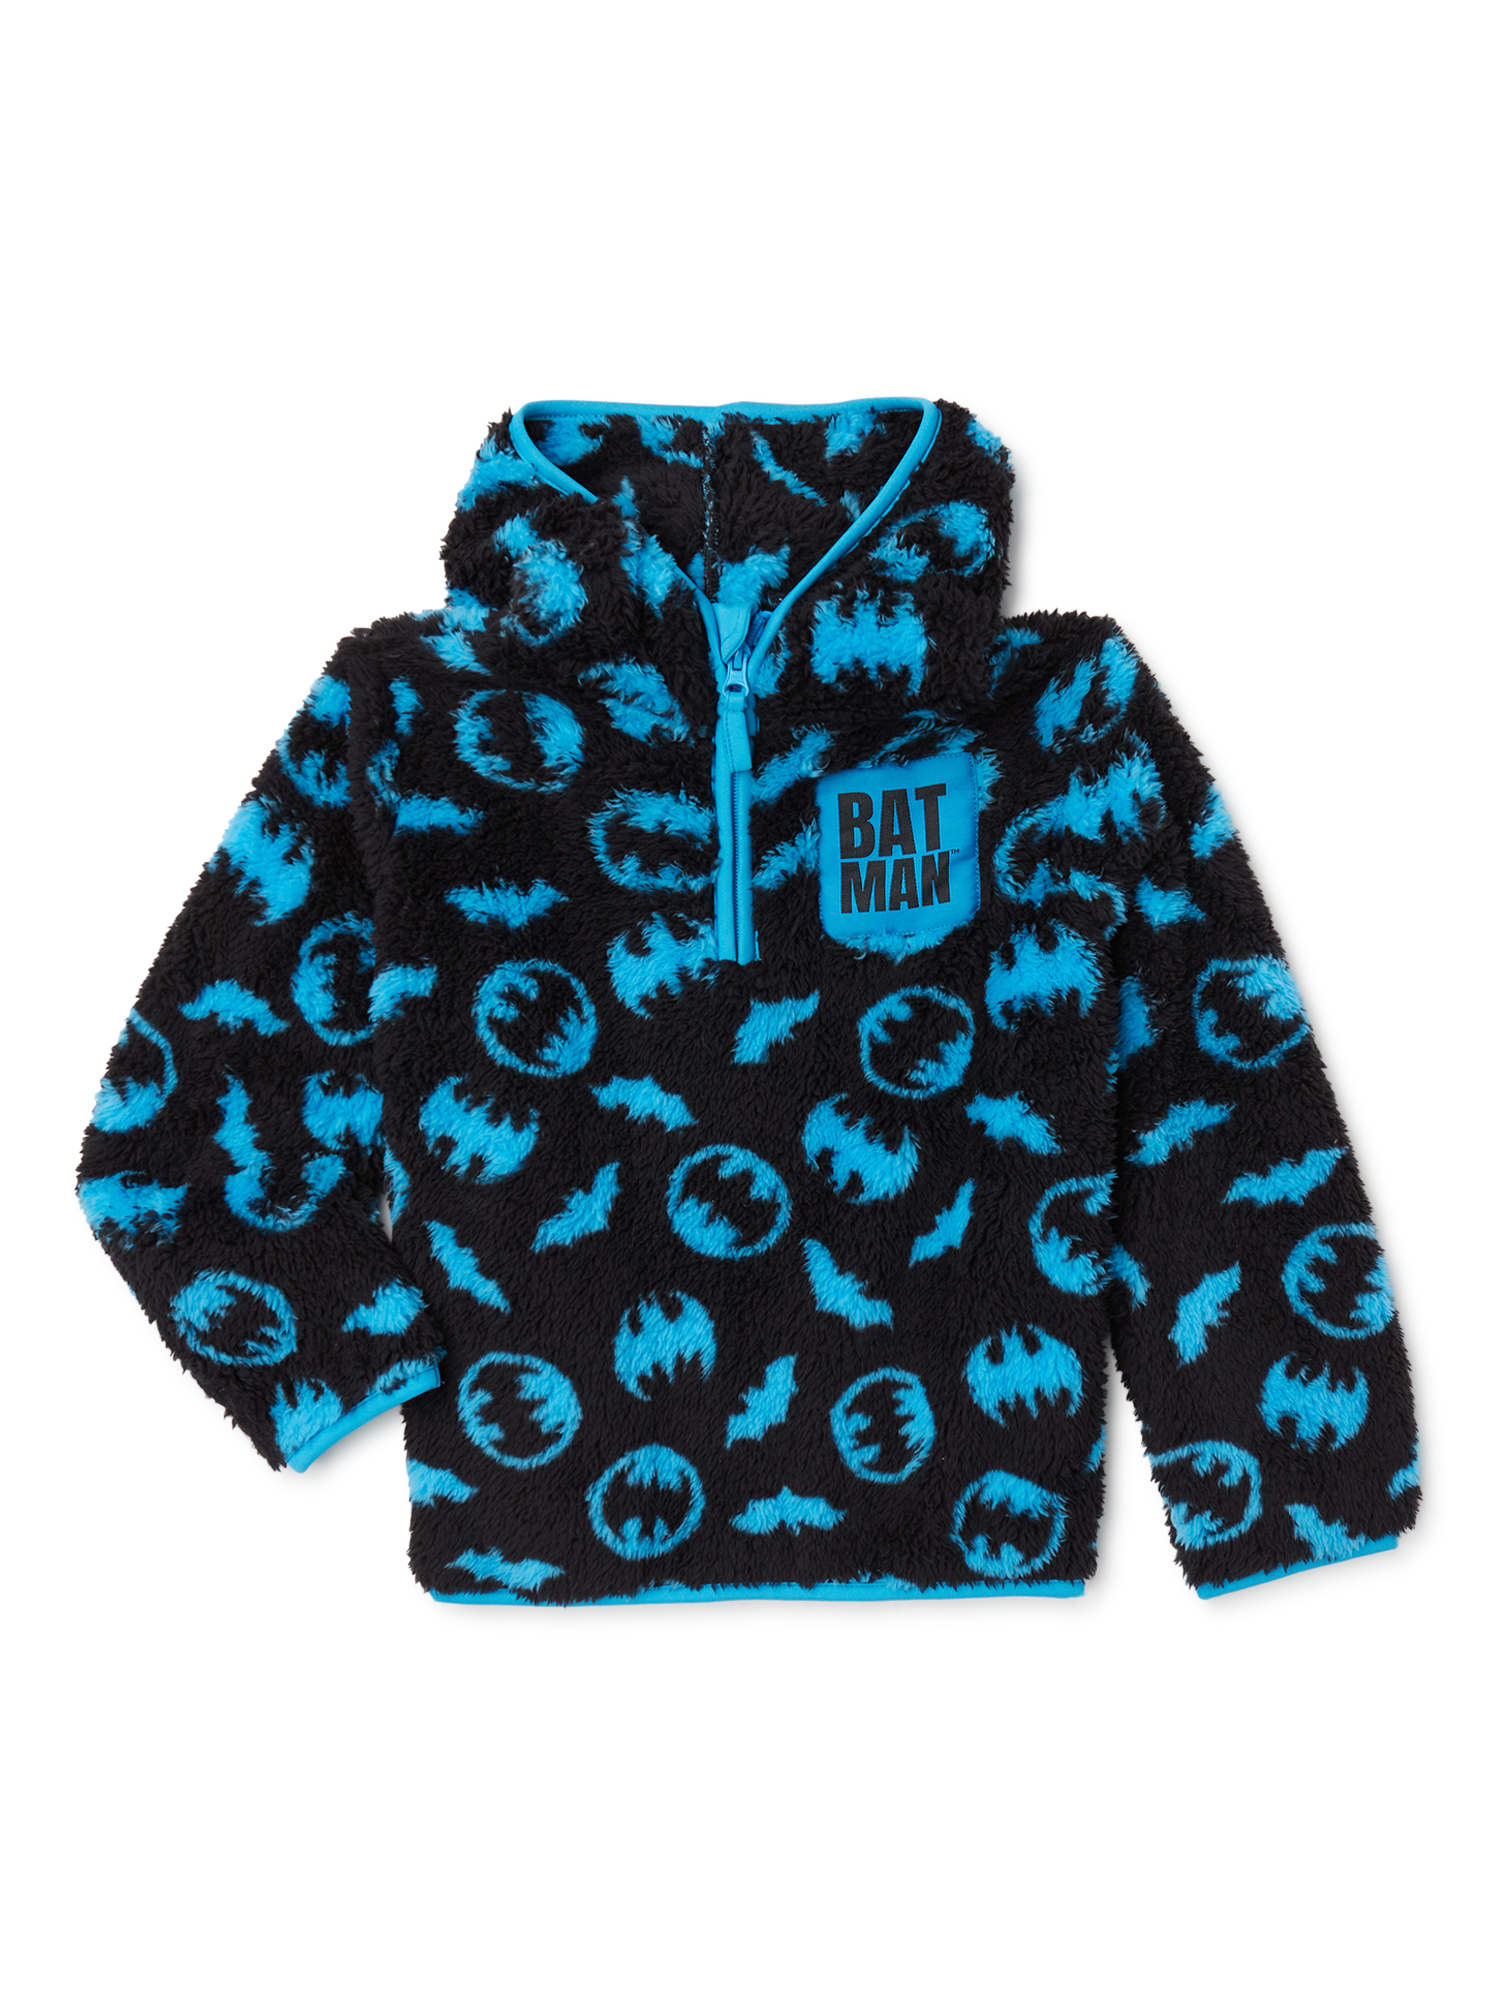 Batman Baby and Toddler Boys Faux Sherpa Quarter Zip Fleece Hoodie, Sizes 12M-5T - image 1 of 3